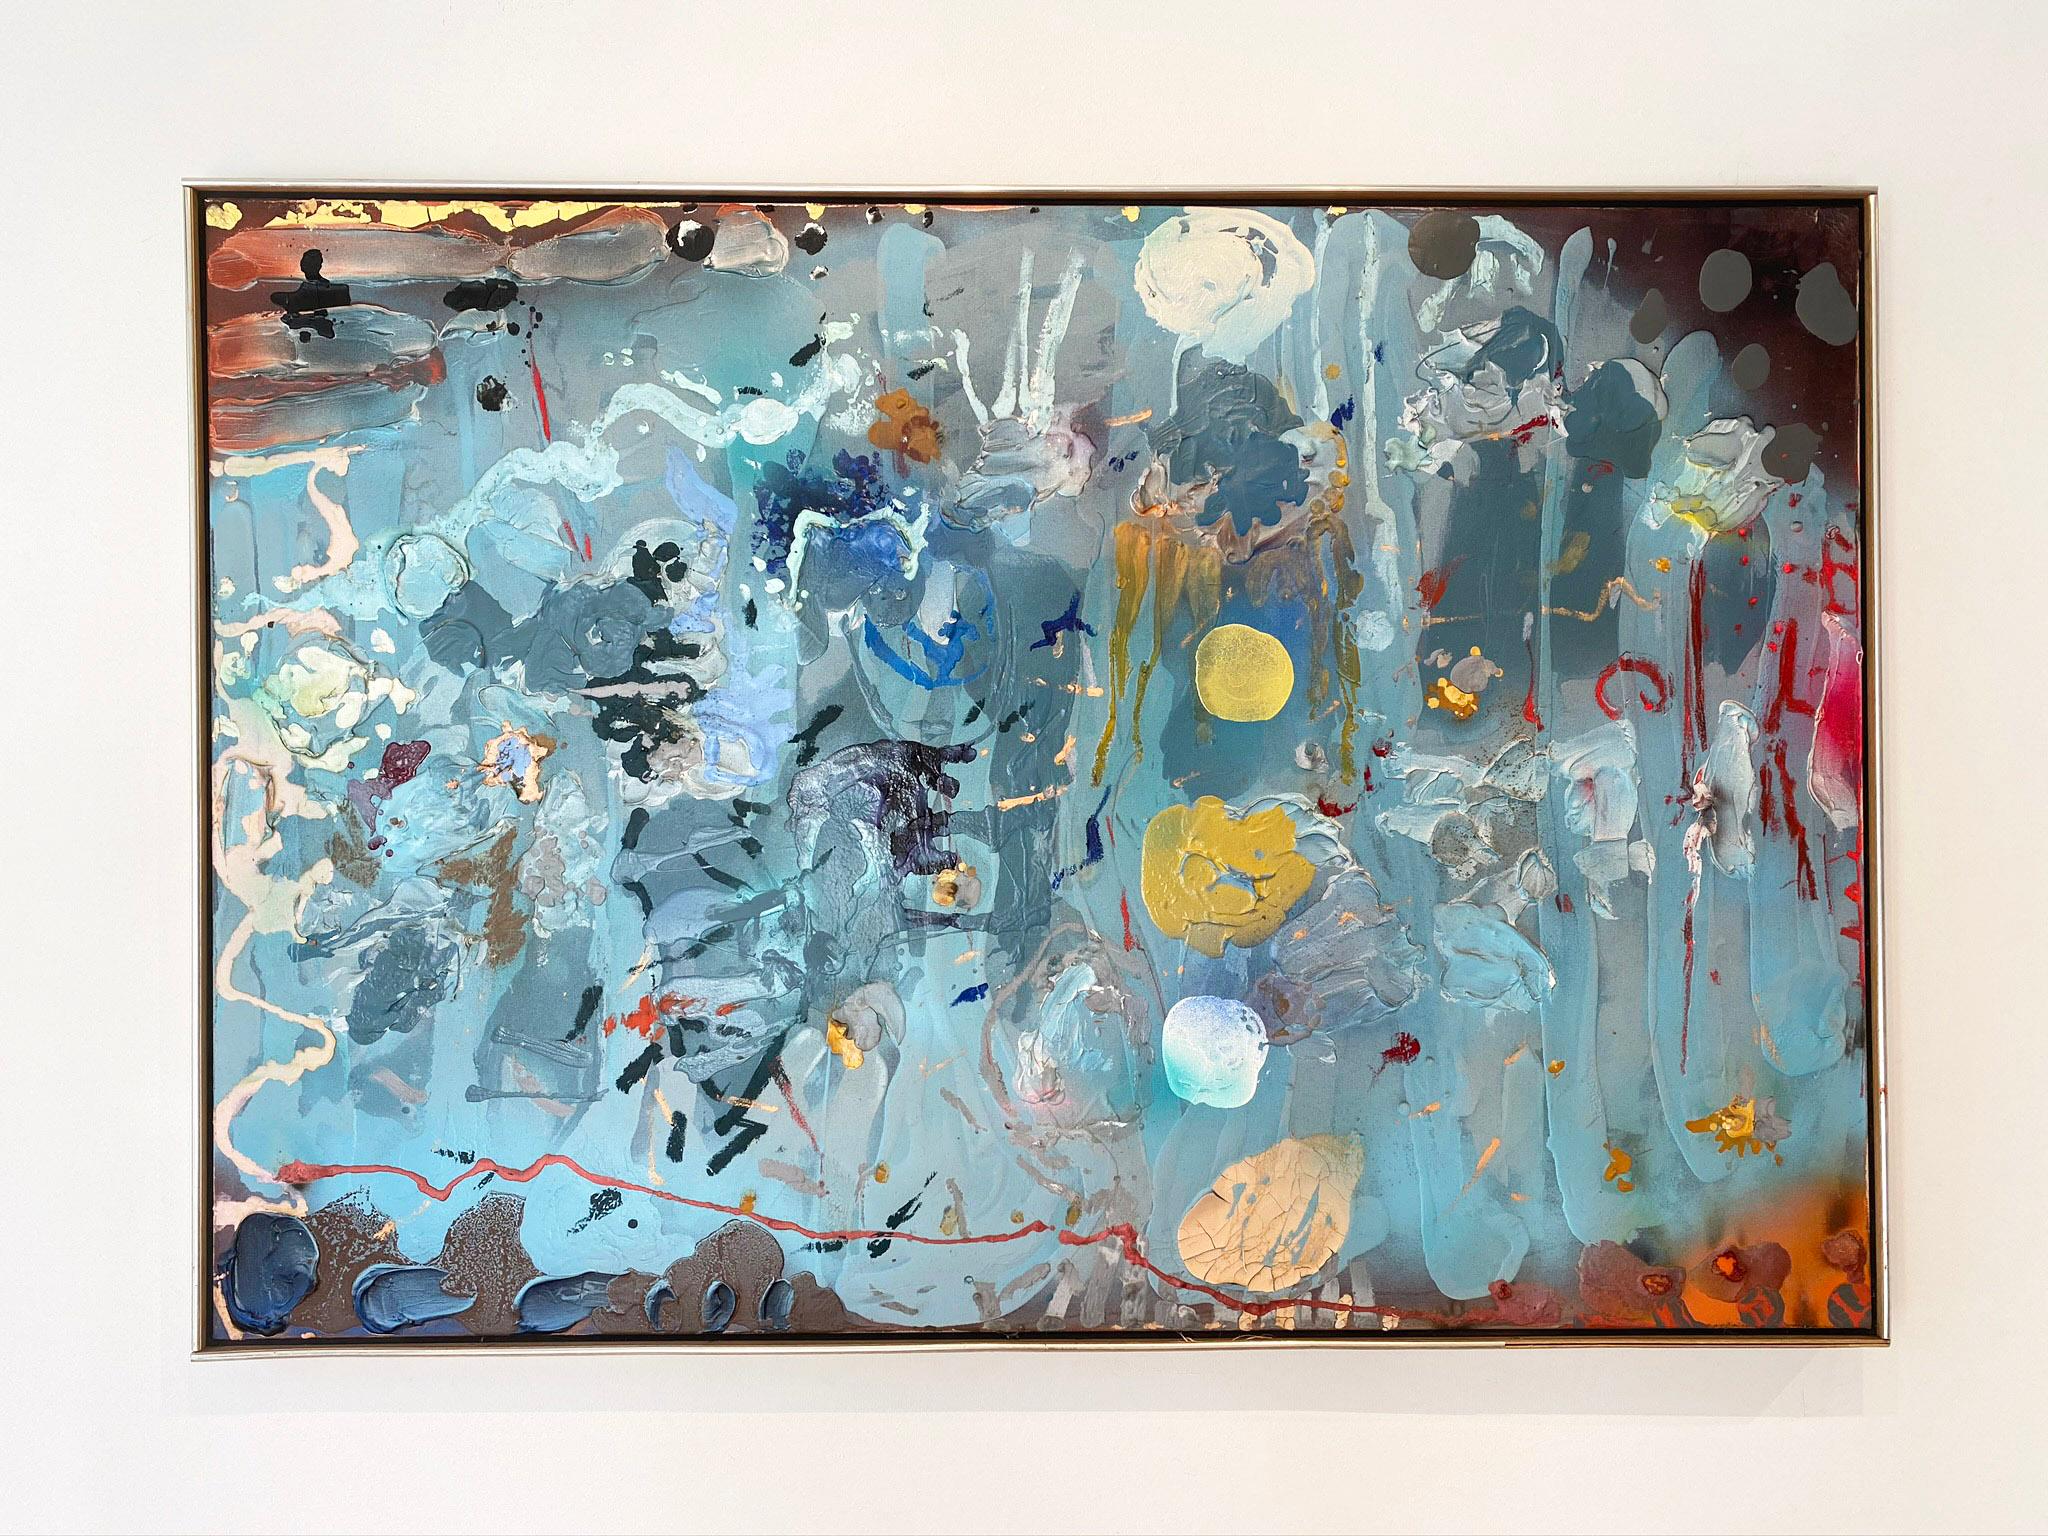 'Plainsroartenderly' by Stanley Boxer, 1988. Oil and mixed media on canvas, 42.5 x 61 in. This impasto painting has an active surface that is thickly painted with defined brush strokes in a color palette of blue, beige, yellow, brown, red, orange,